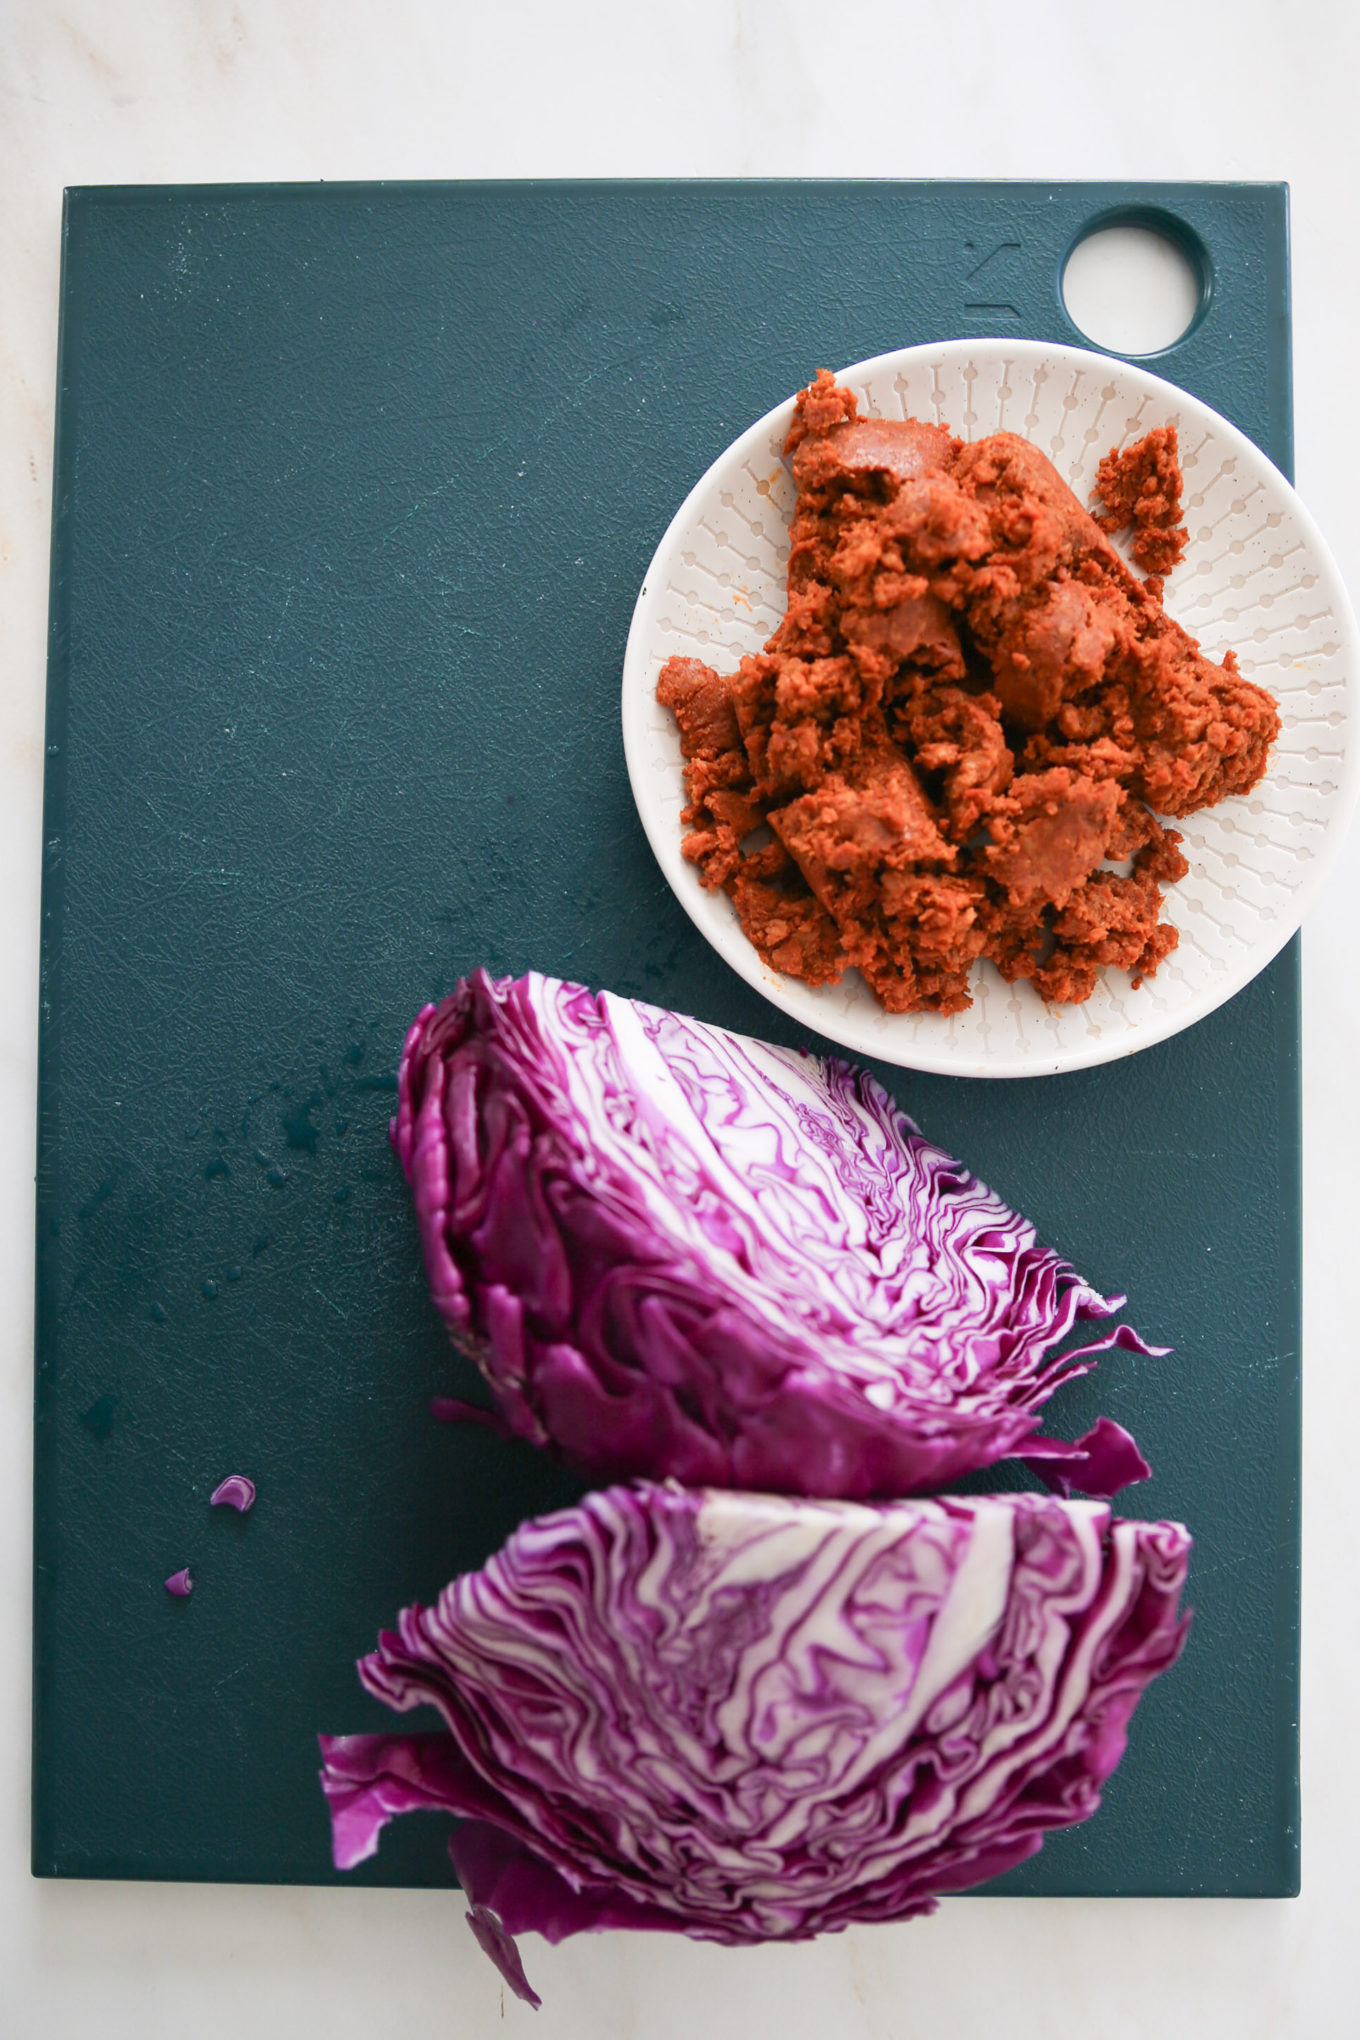 Two quarters of red cabbage and a plate with soy chorizo.